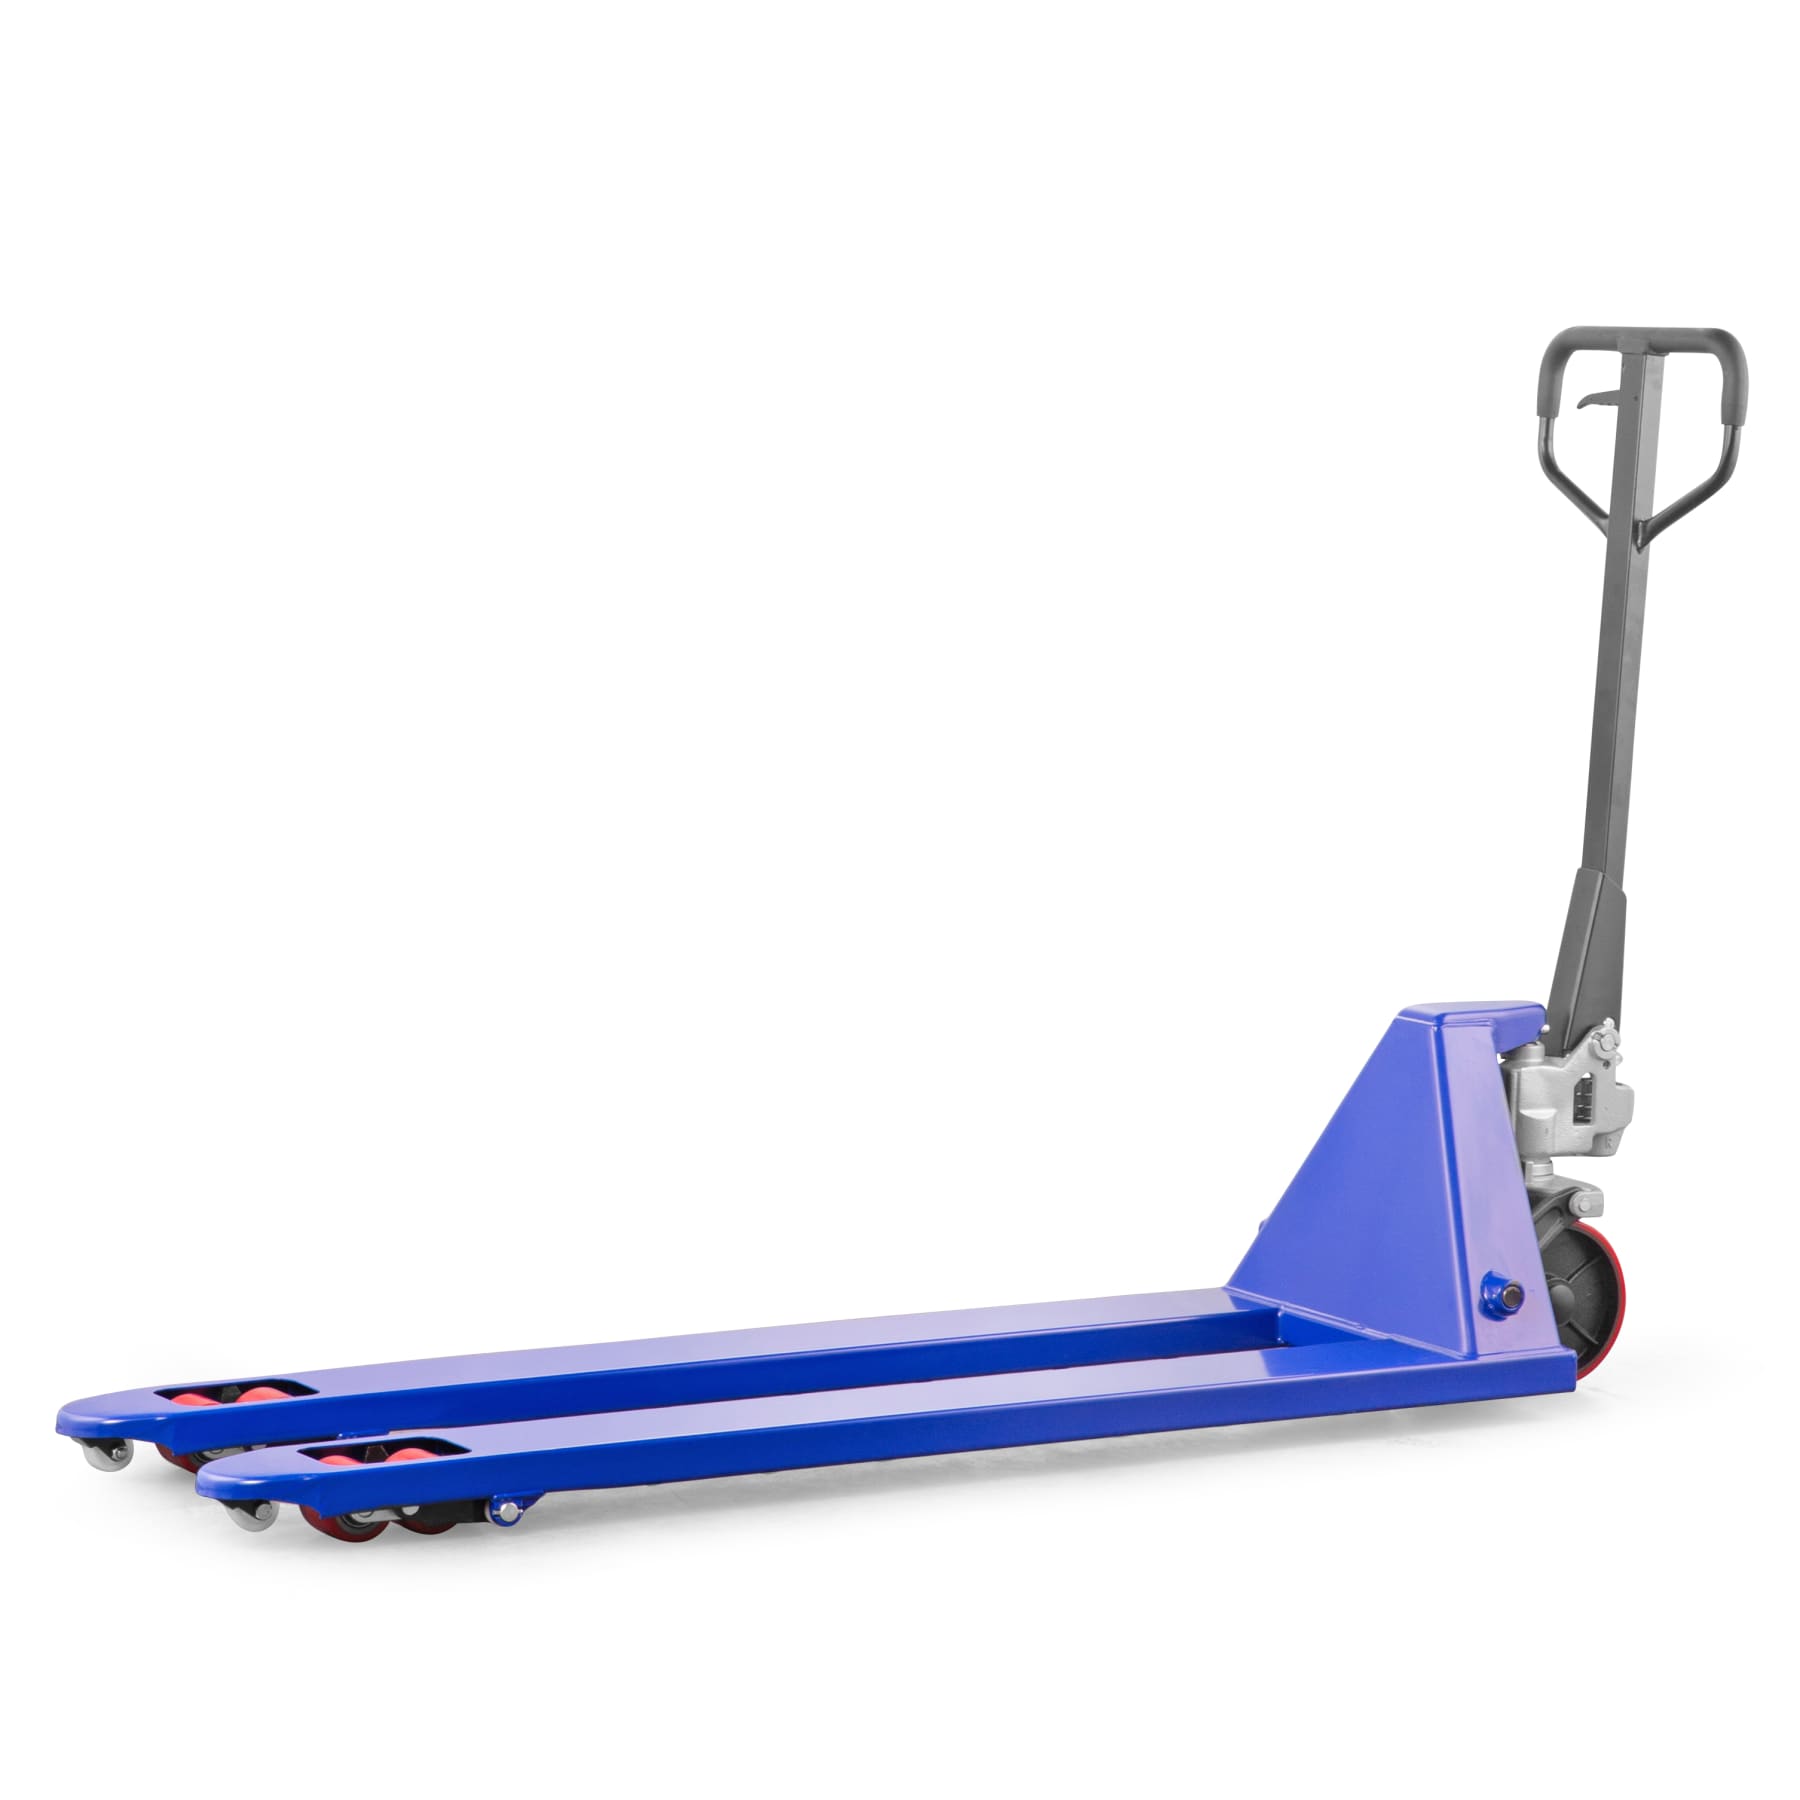 Pallet Truck LONG-M with 1800mm Forks 4